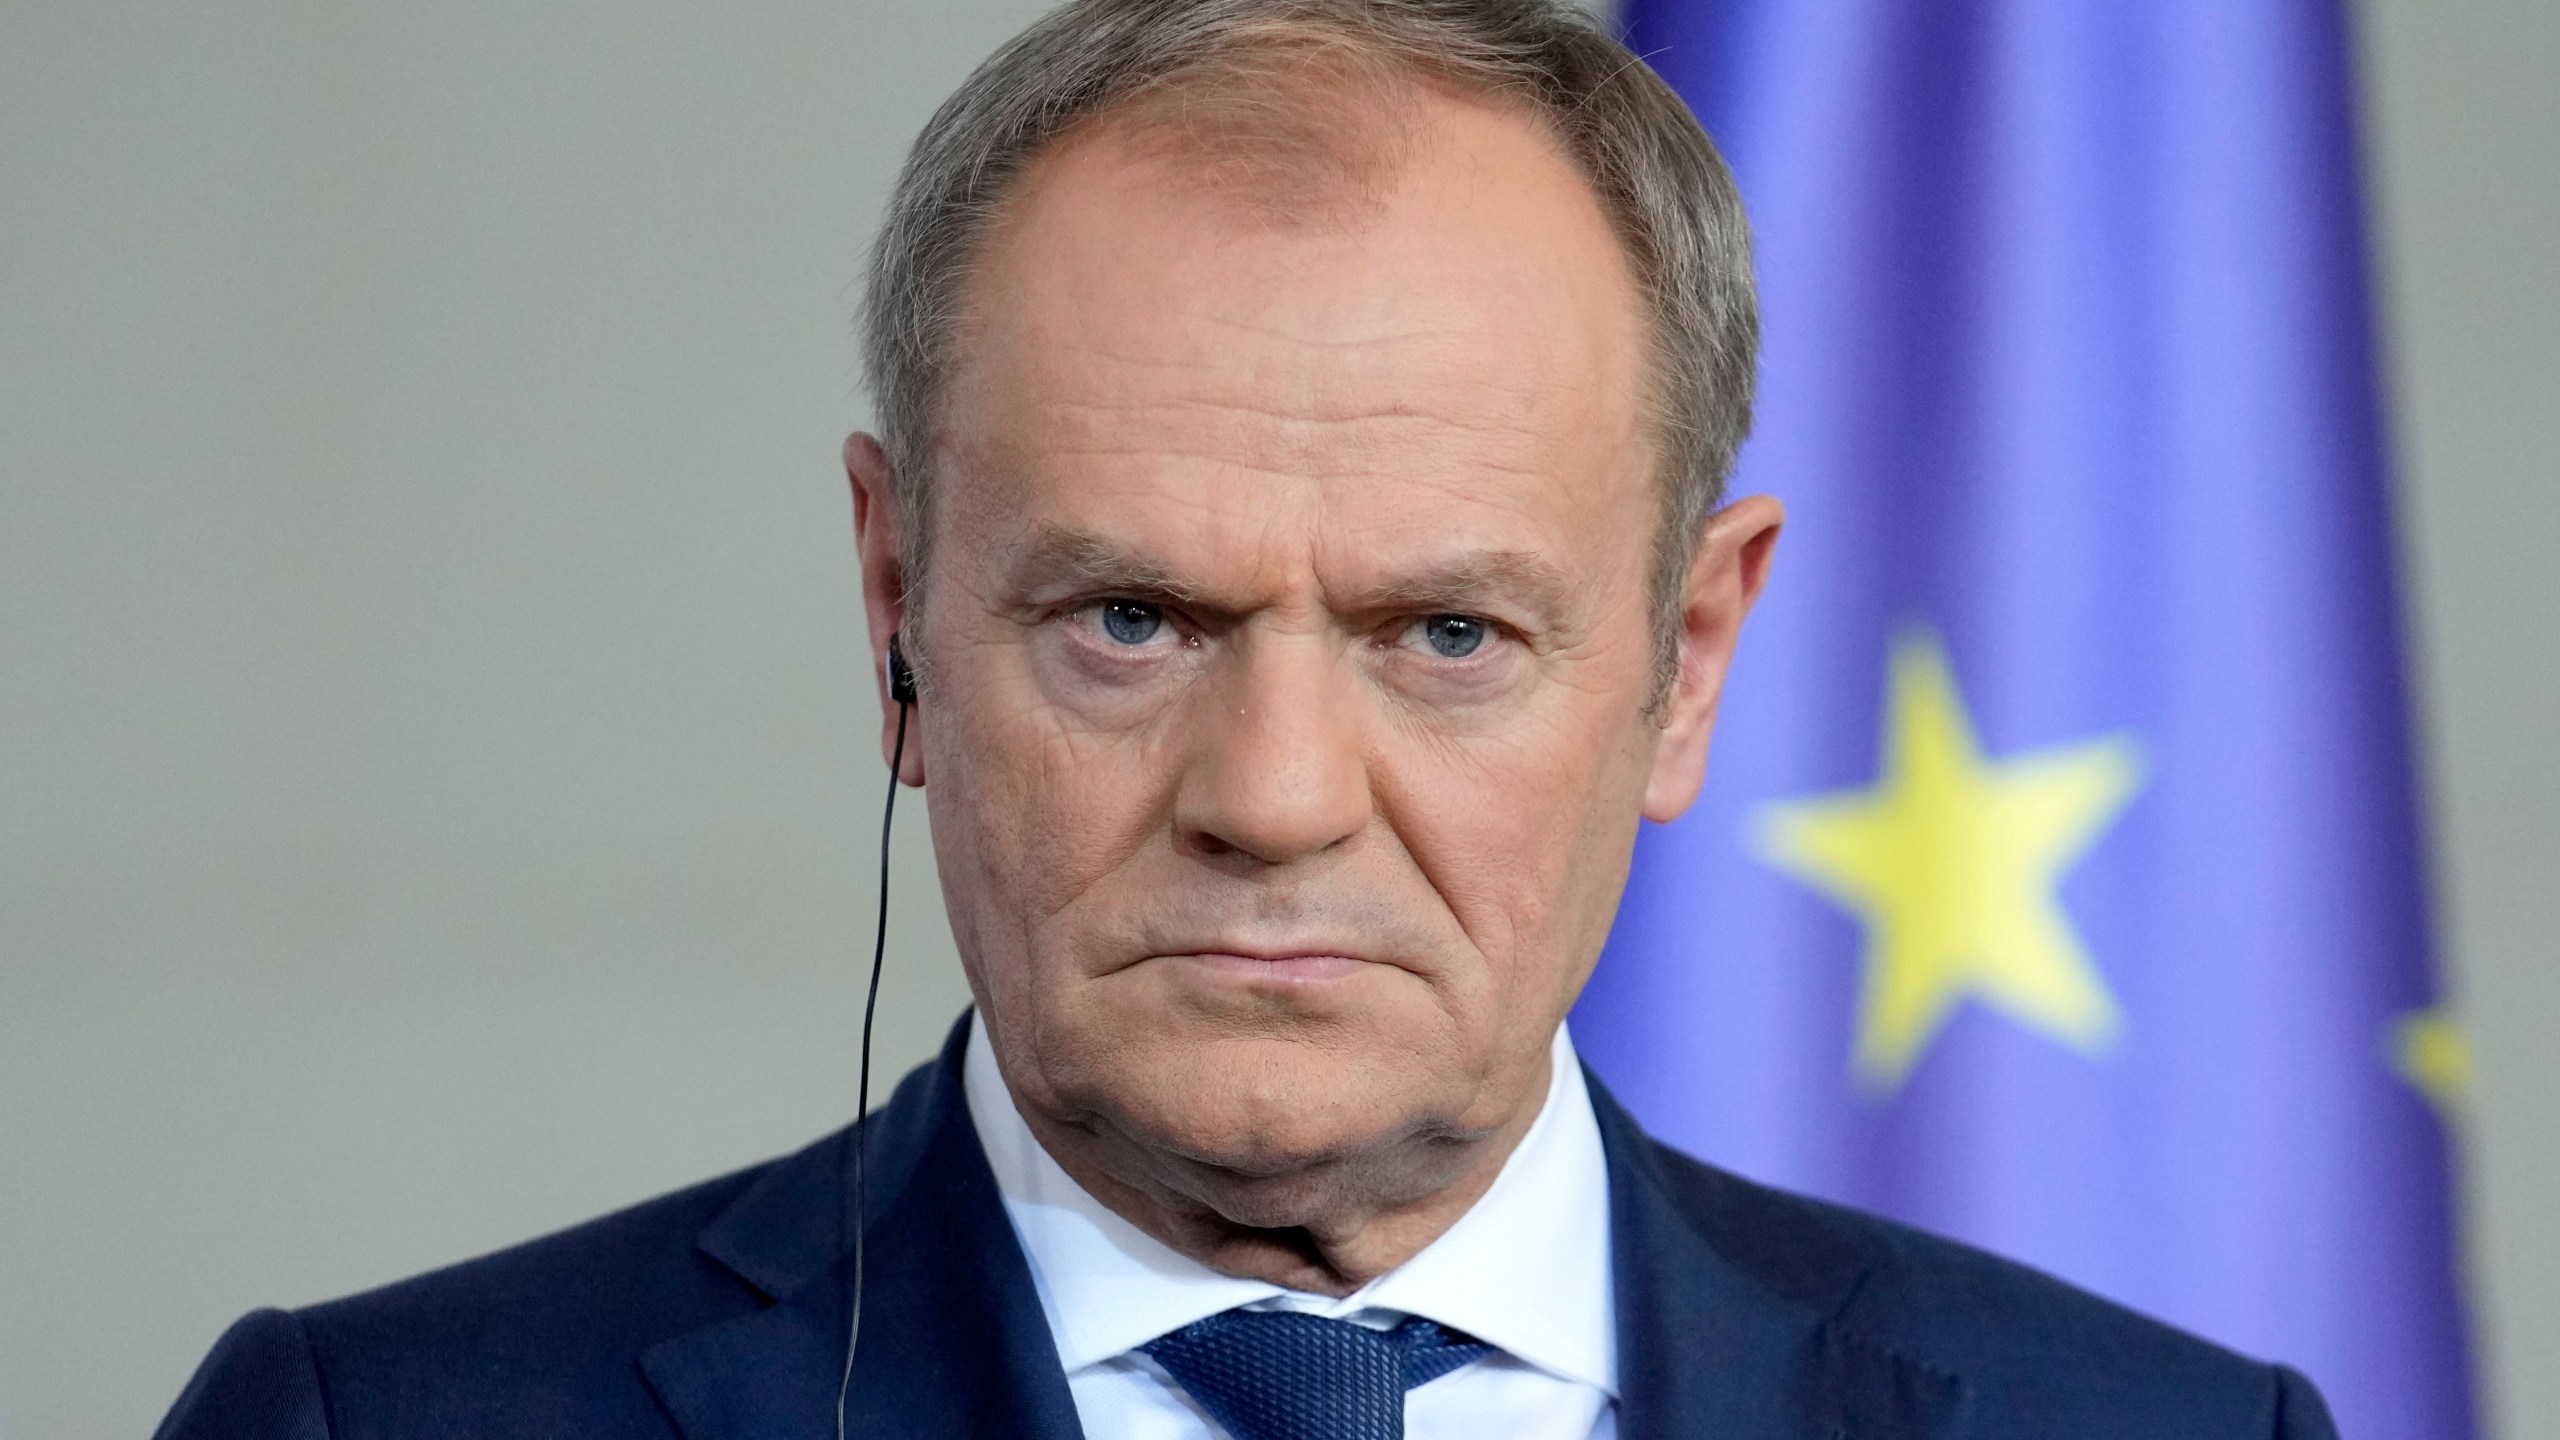 Poland's Prime Minister Donald Tusk listens to the media in Berlin, Germany, Friday, March 15, 2024. German Chancellor Olaf Scholz, France's President Emmanuel Macron and Poland's Prime Minister Donald Tusk meet in Berlin for the so-called Weimar Triangle talks. (AP Photo/Ebrahim Noroozi)